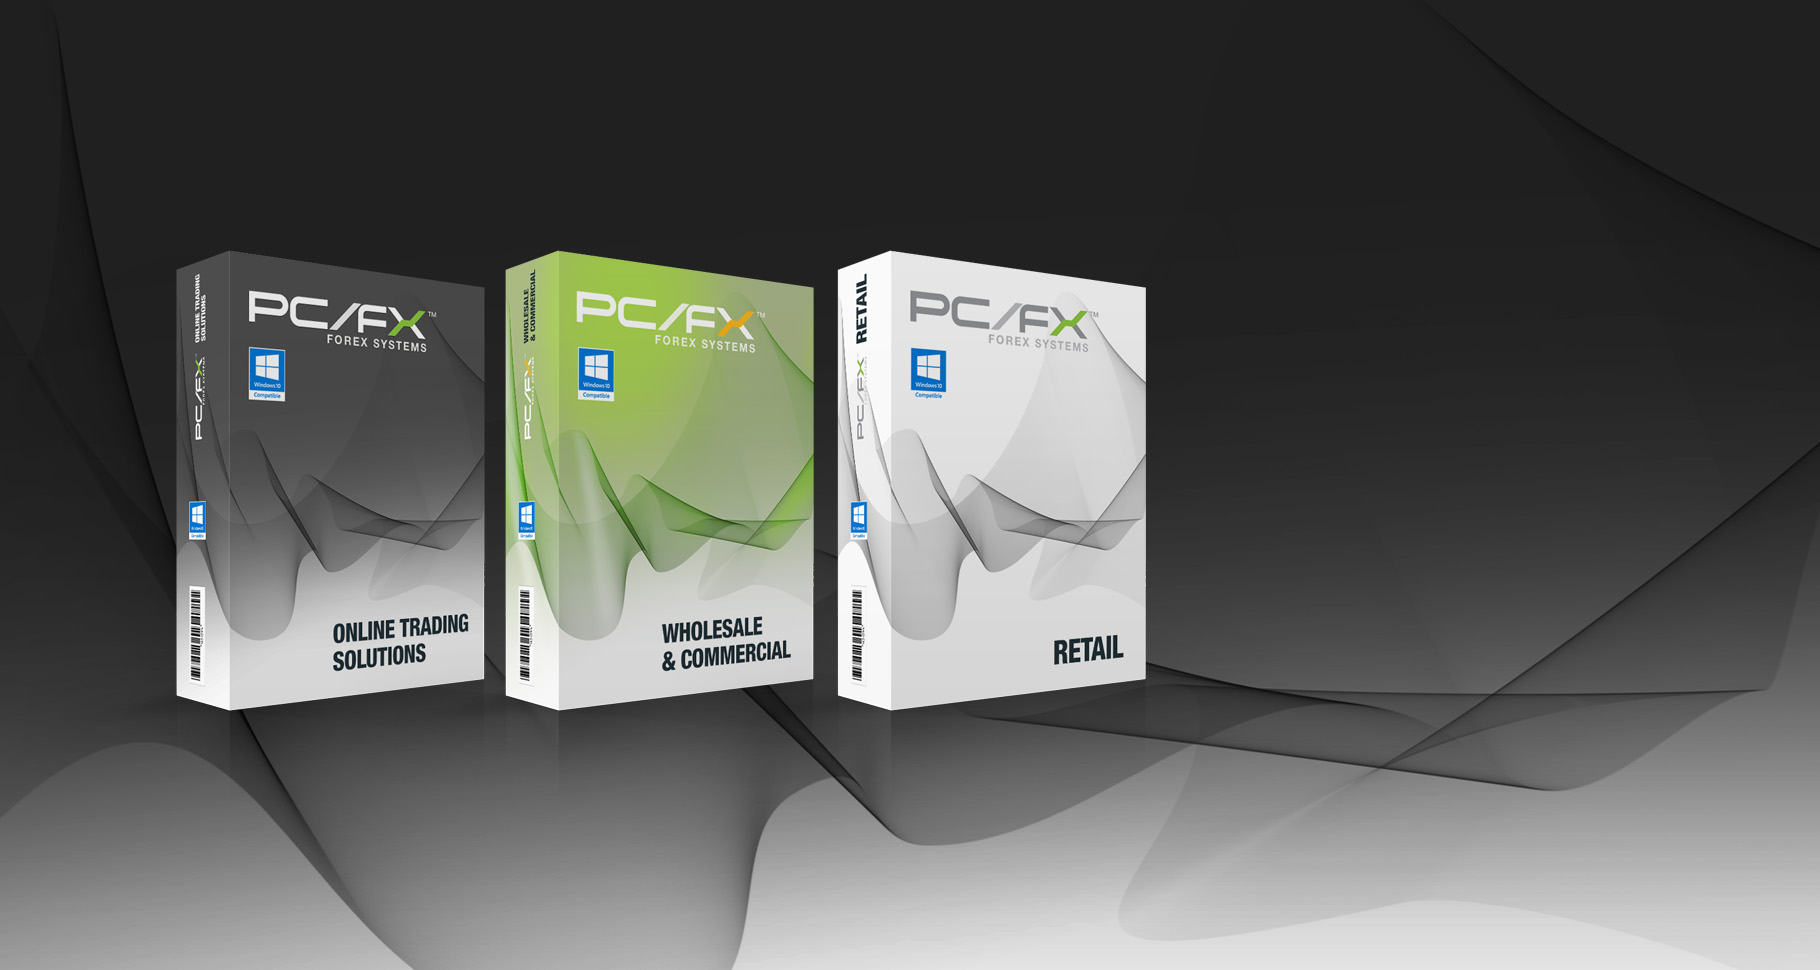 PC/FX™ IS THE FUTURE OF FOREX